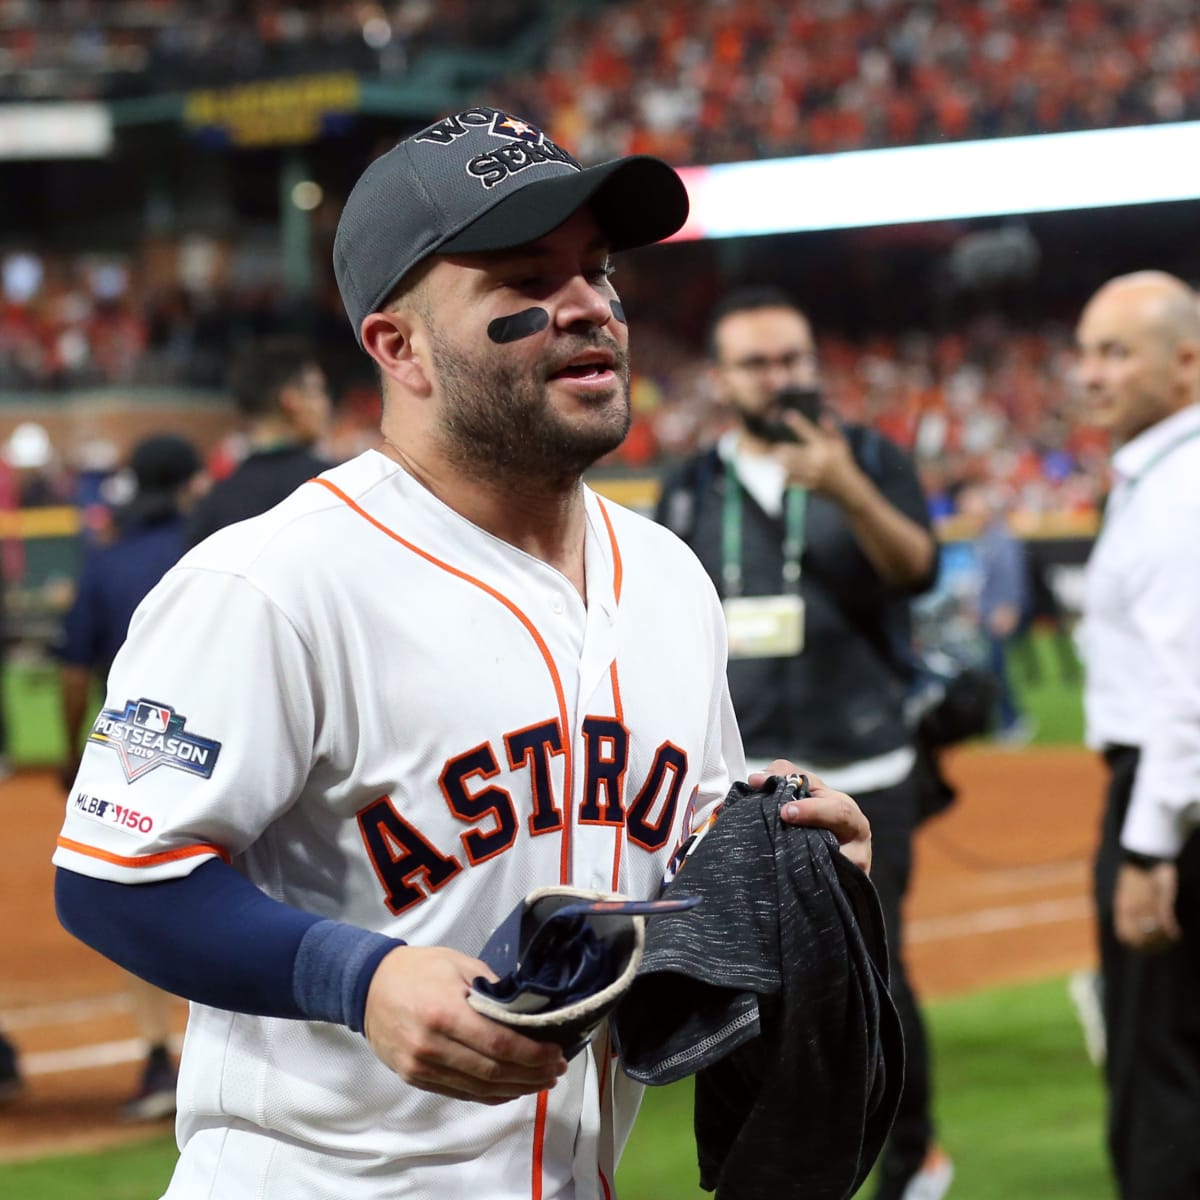 Internet explodes with hilarious memes after Astros' apology